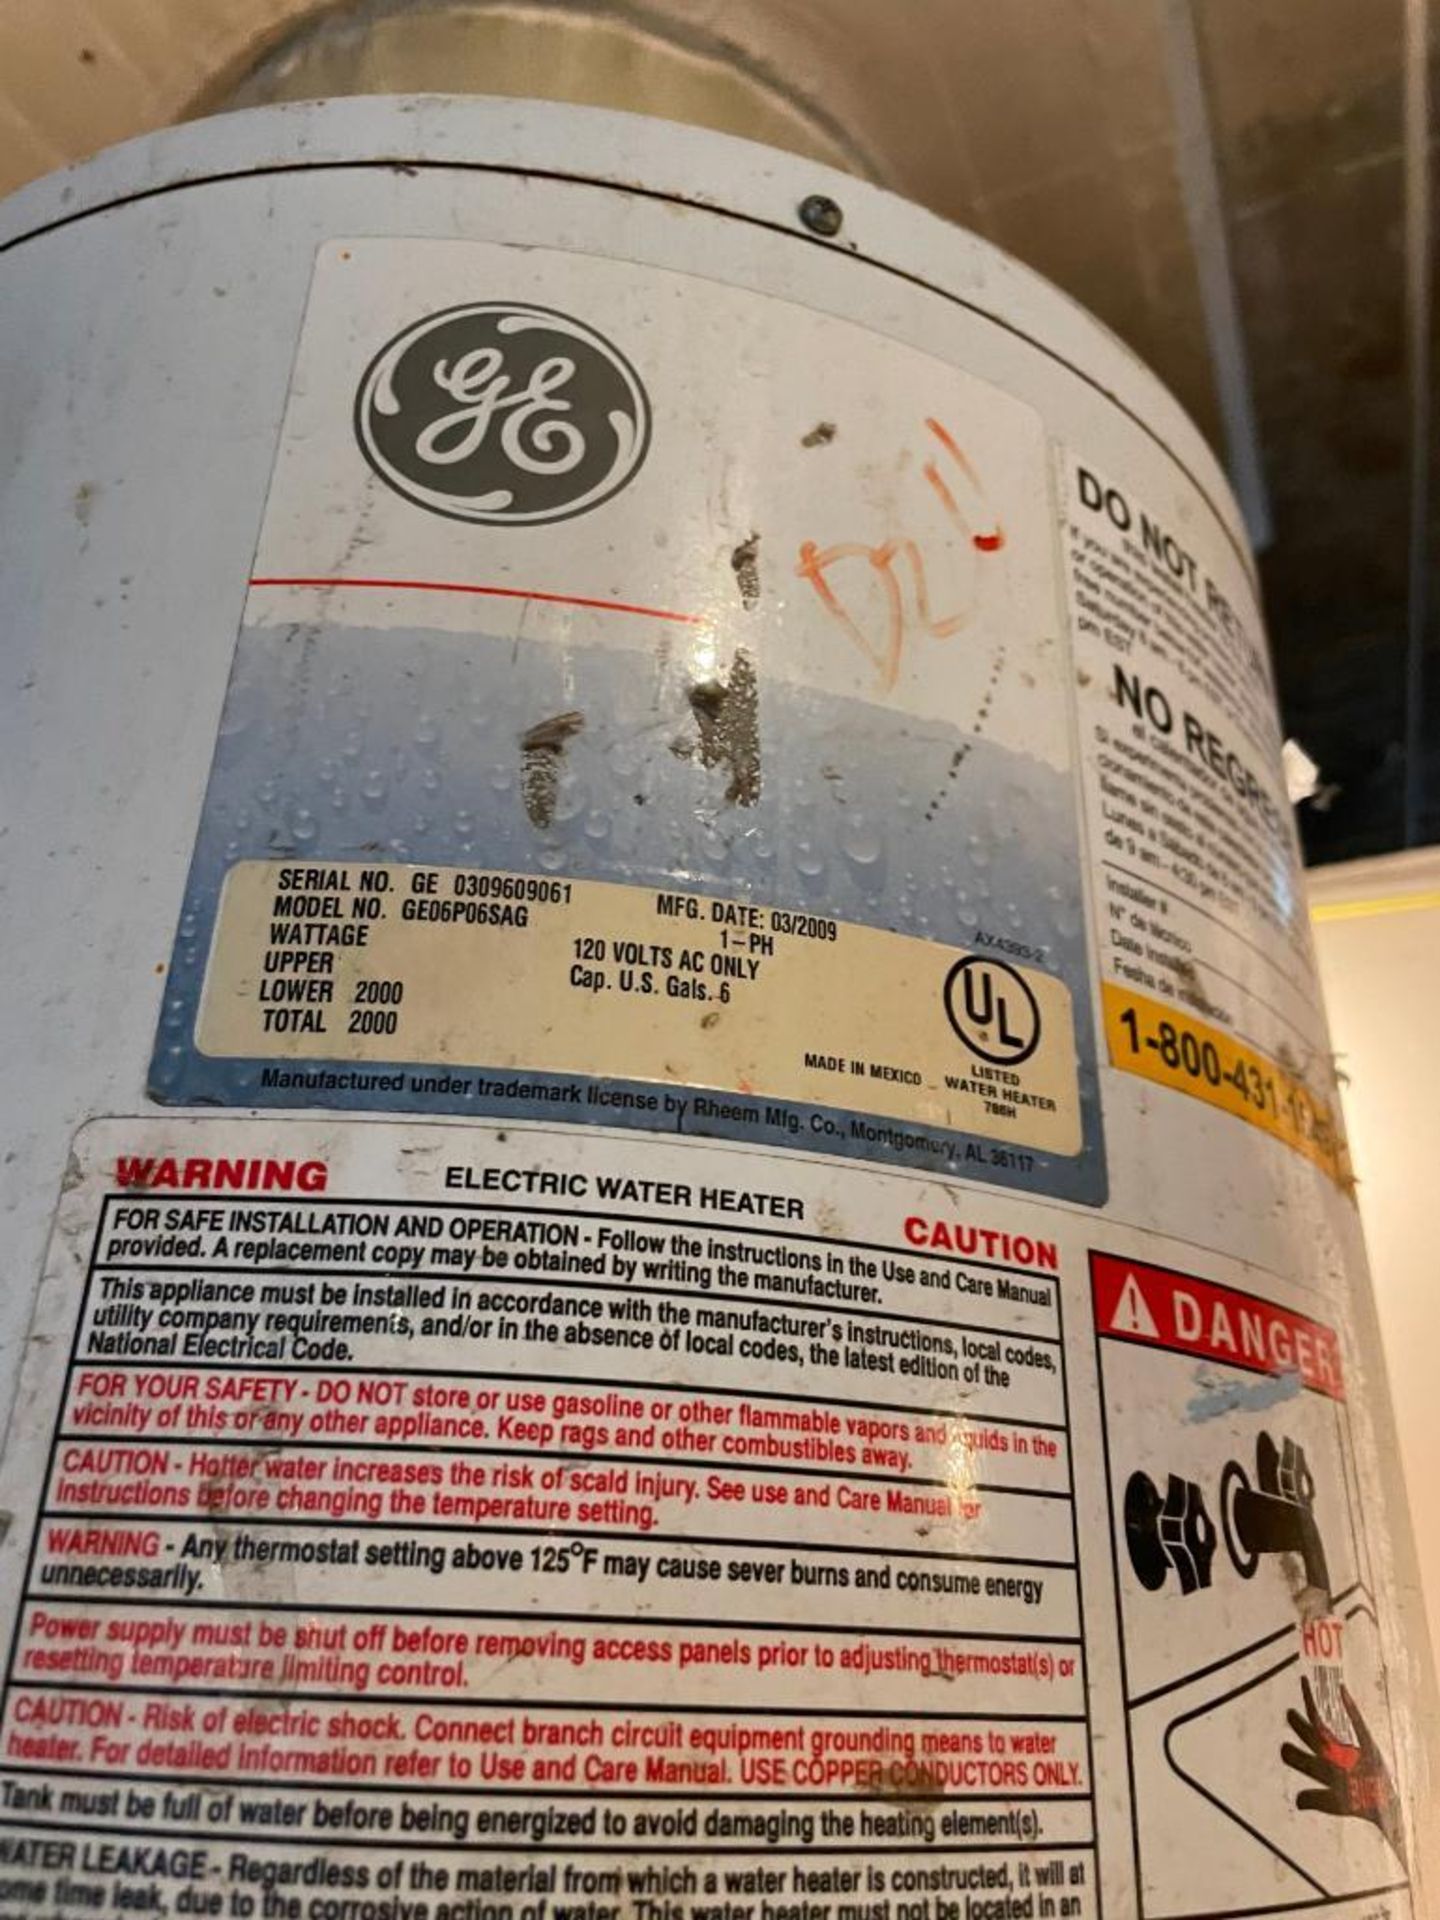 DESCRIPTION: 6 GALLON ELECTRIC WATER HEATER BRAND/MODEL: GE GE06P06SAG LOCATION: ROOM 2 QTY: 1 - Image 3 of 3